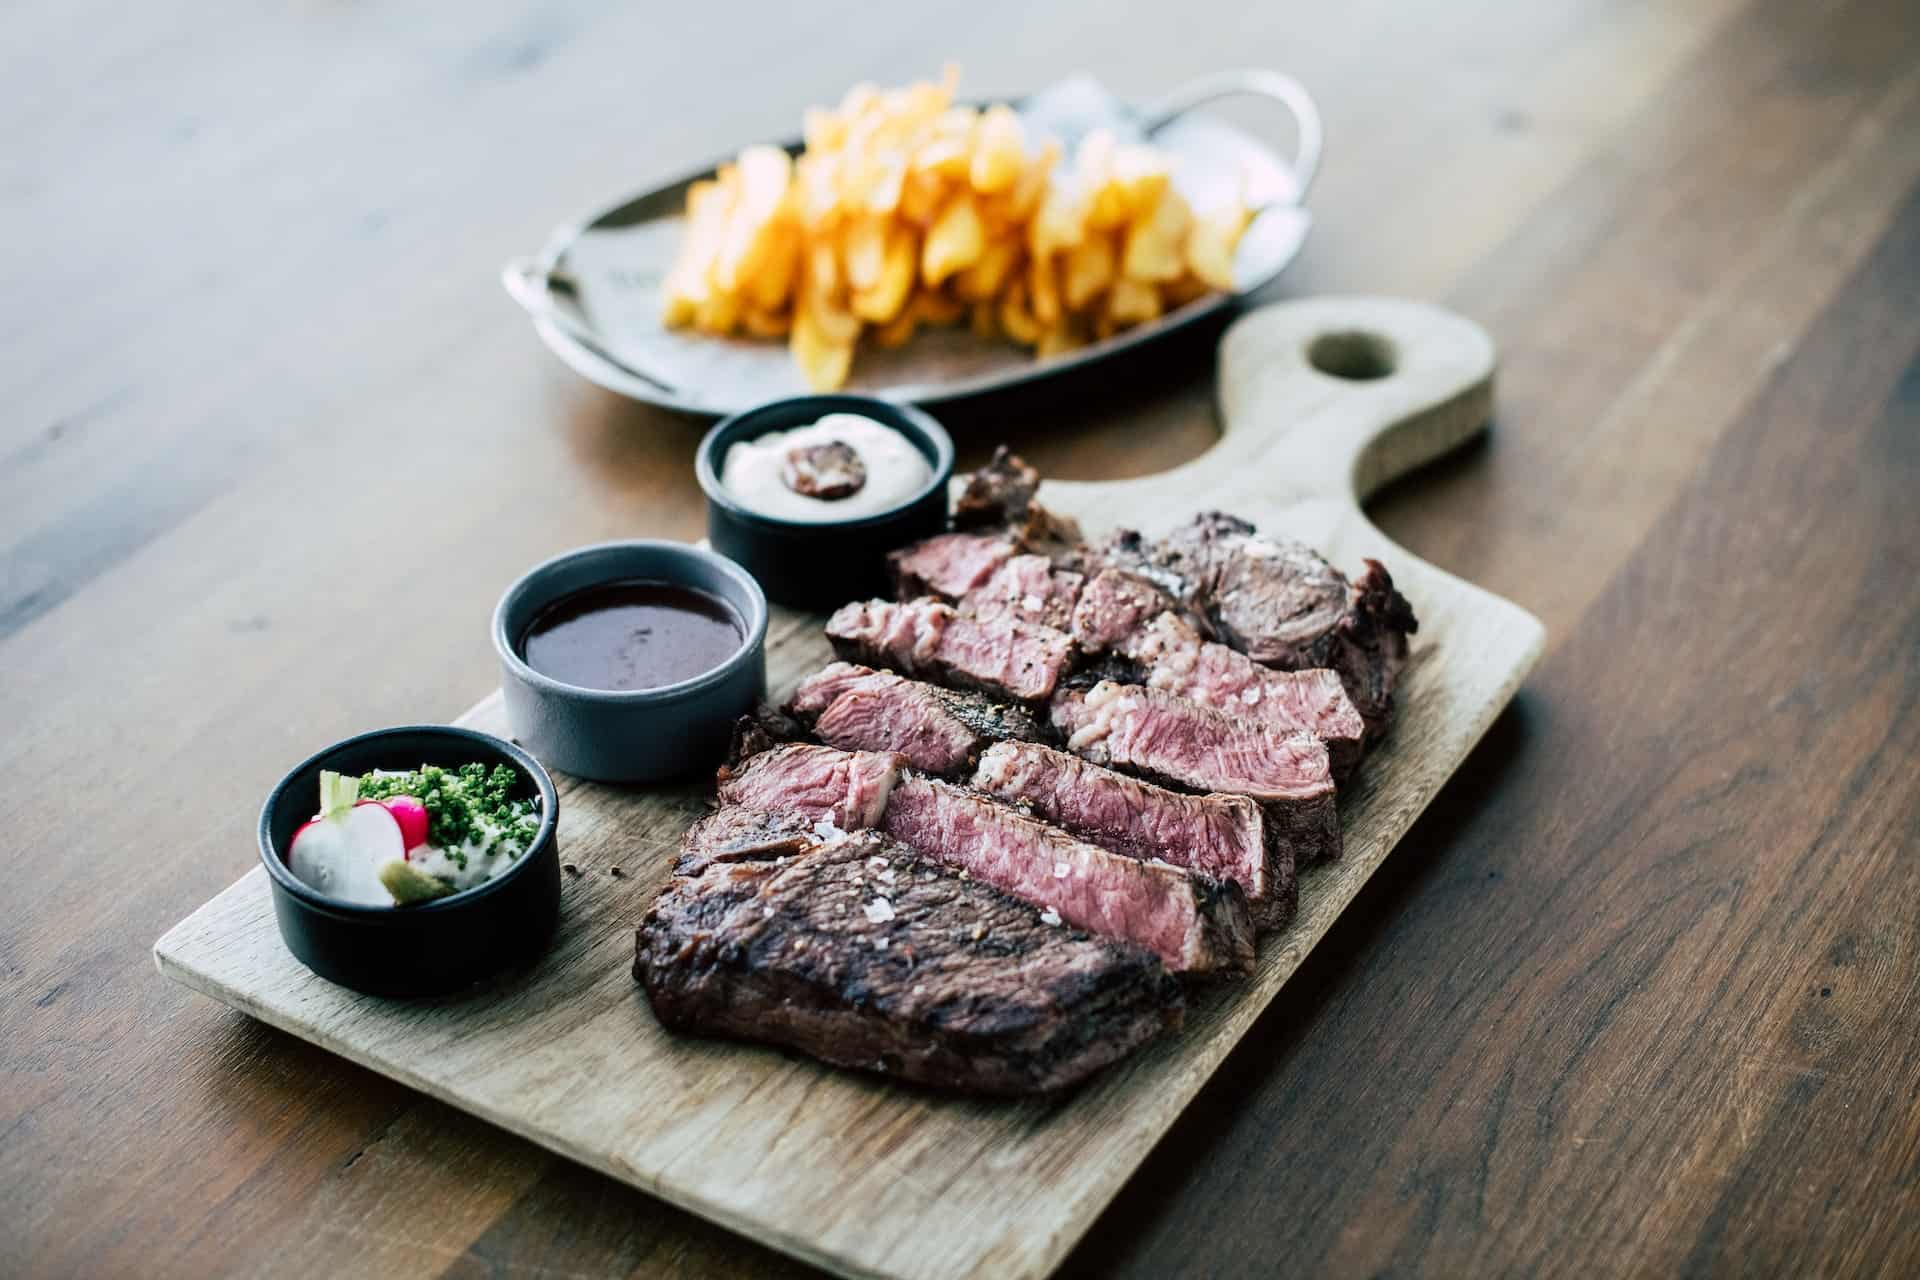 Steak on a cutting board with fries.